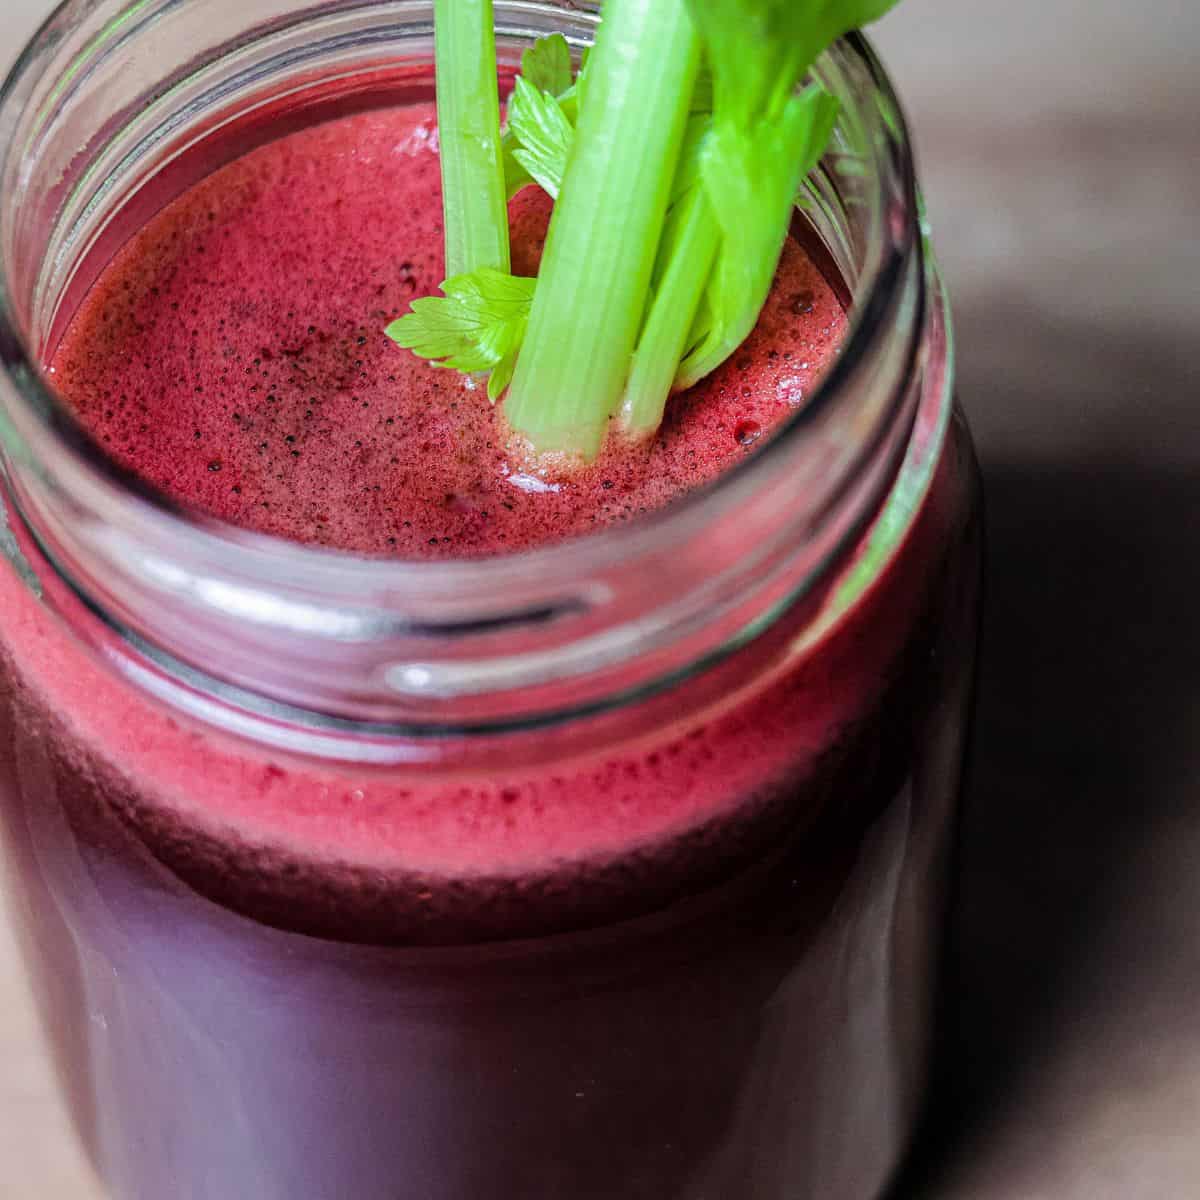 A close-up of a vibrant, red-hued juice in a mason jar garnished with a celery stick, indicating a nutrient-rich fresh juice.